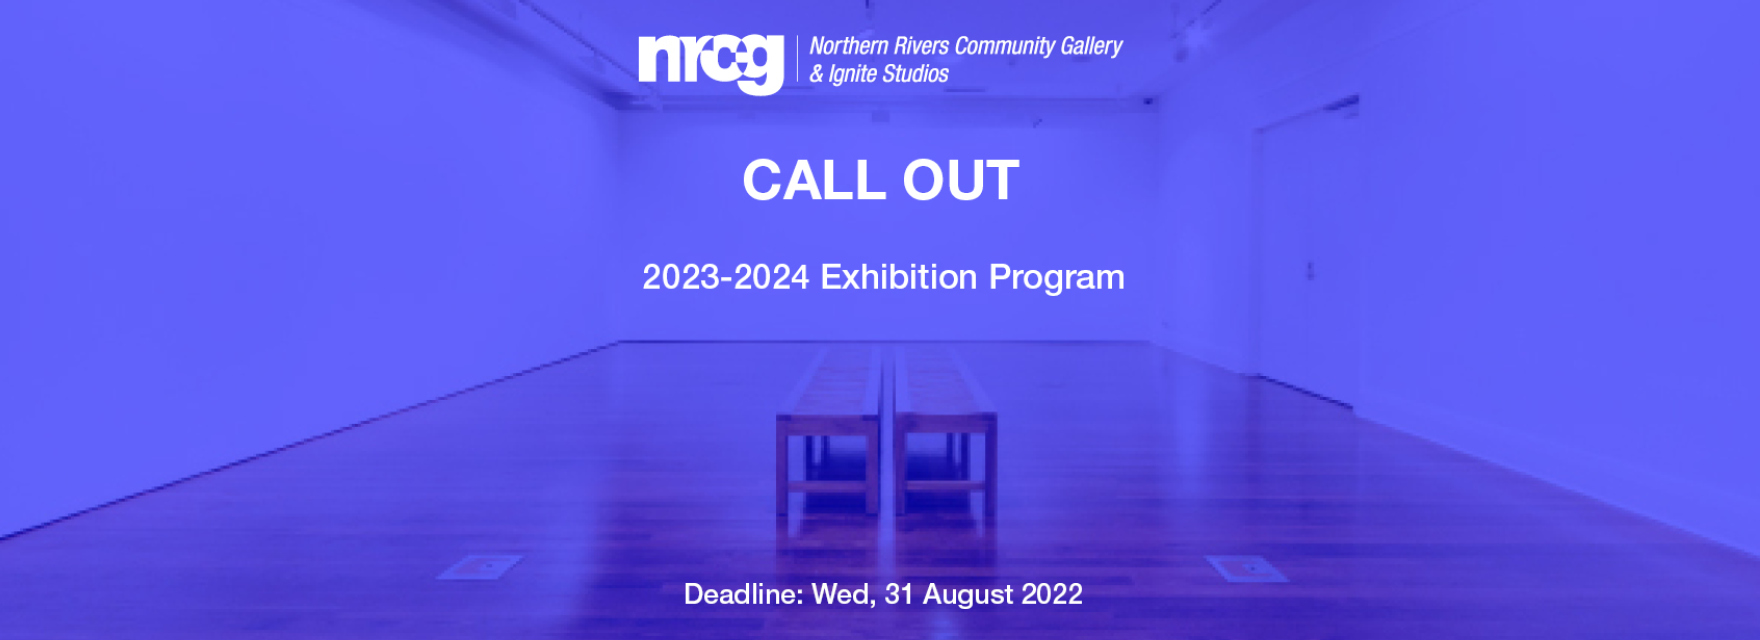 CALL OUT | 2023-2024 EXHIBITION PROGRAM